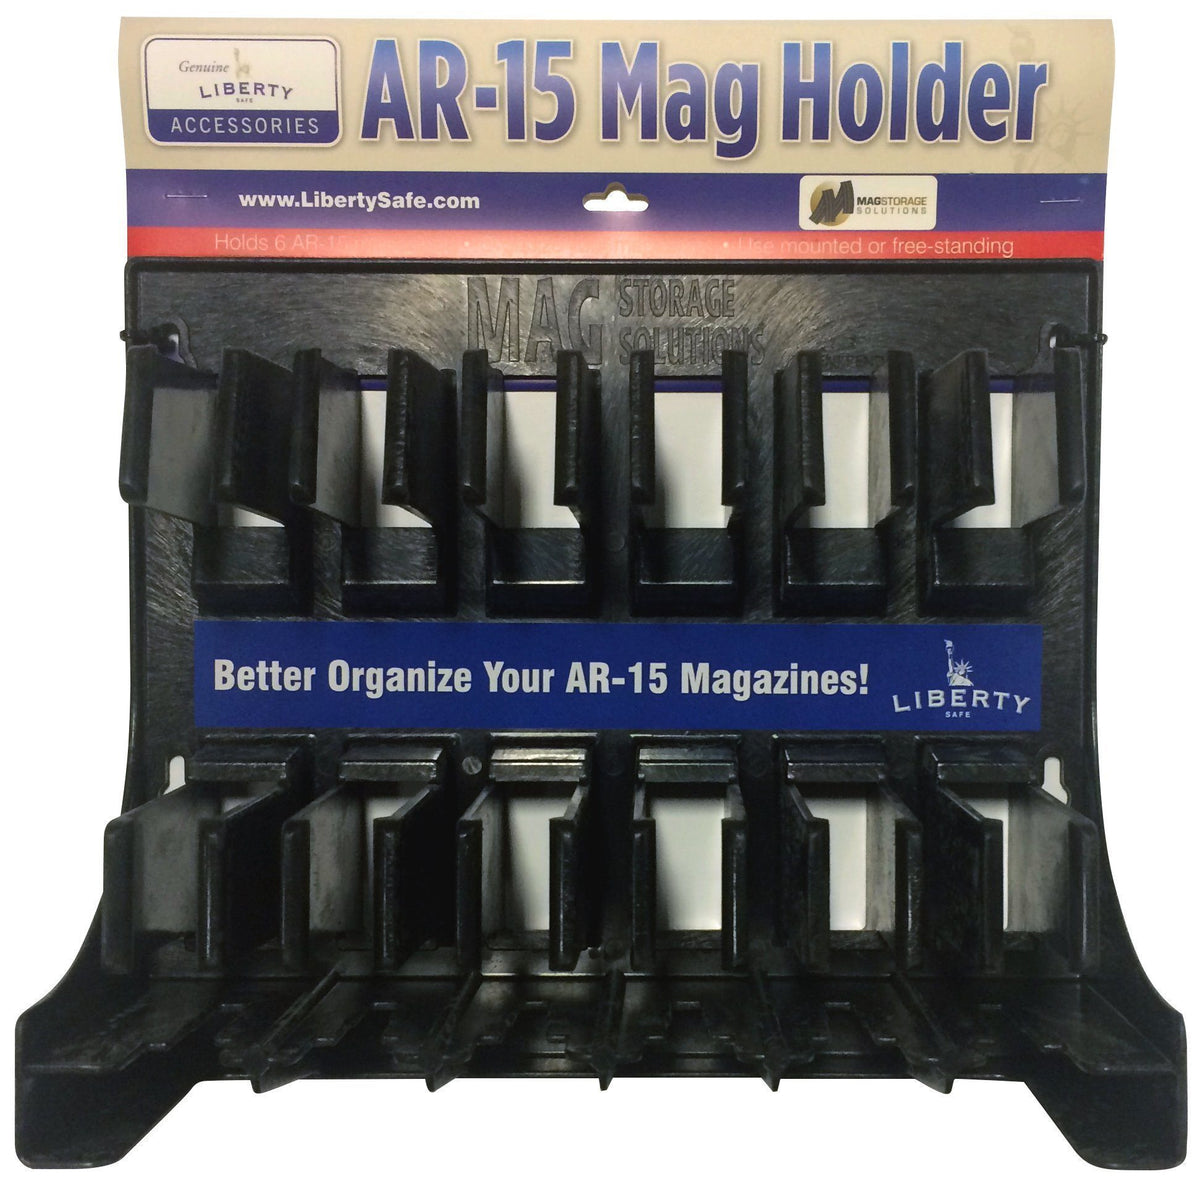 Liberty Safe-accessory-storage-magholder-ar15